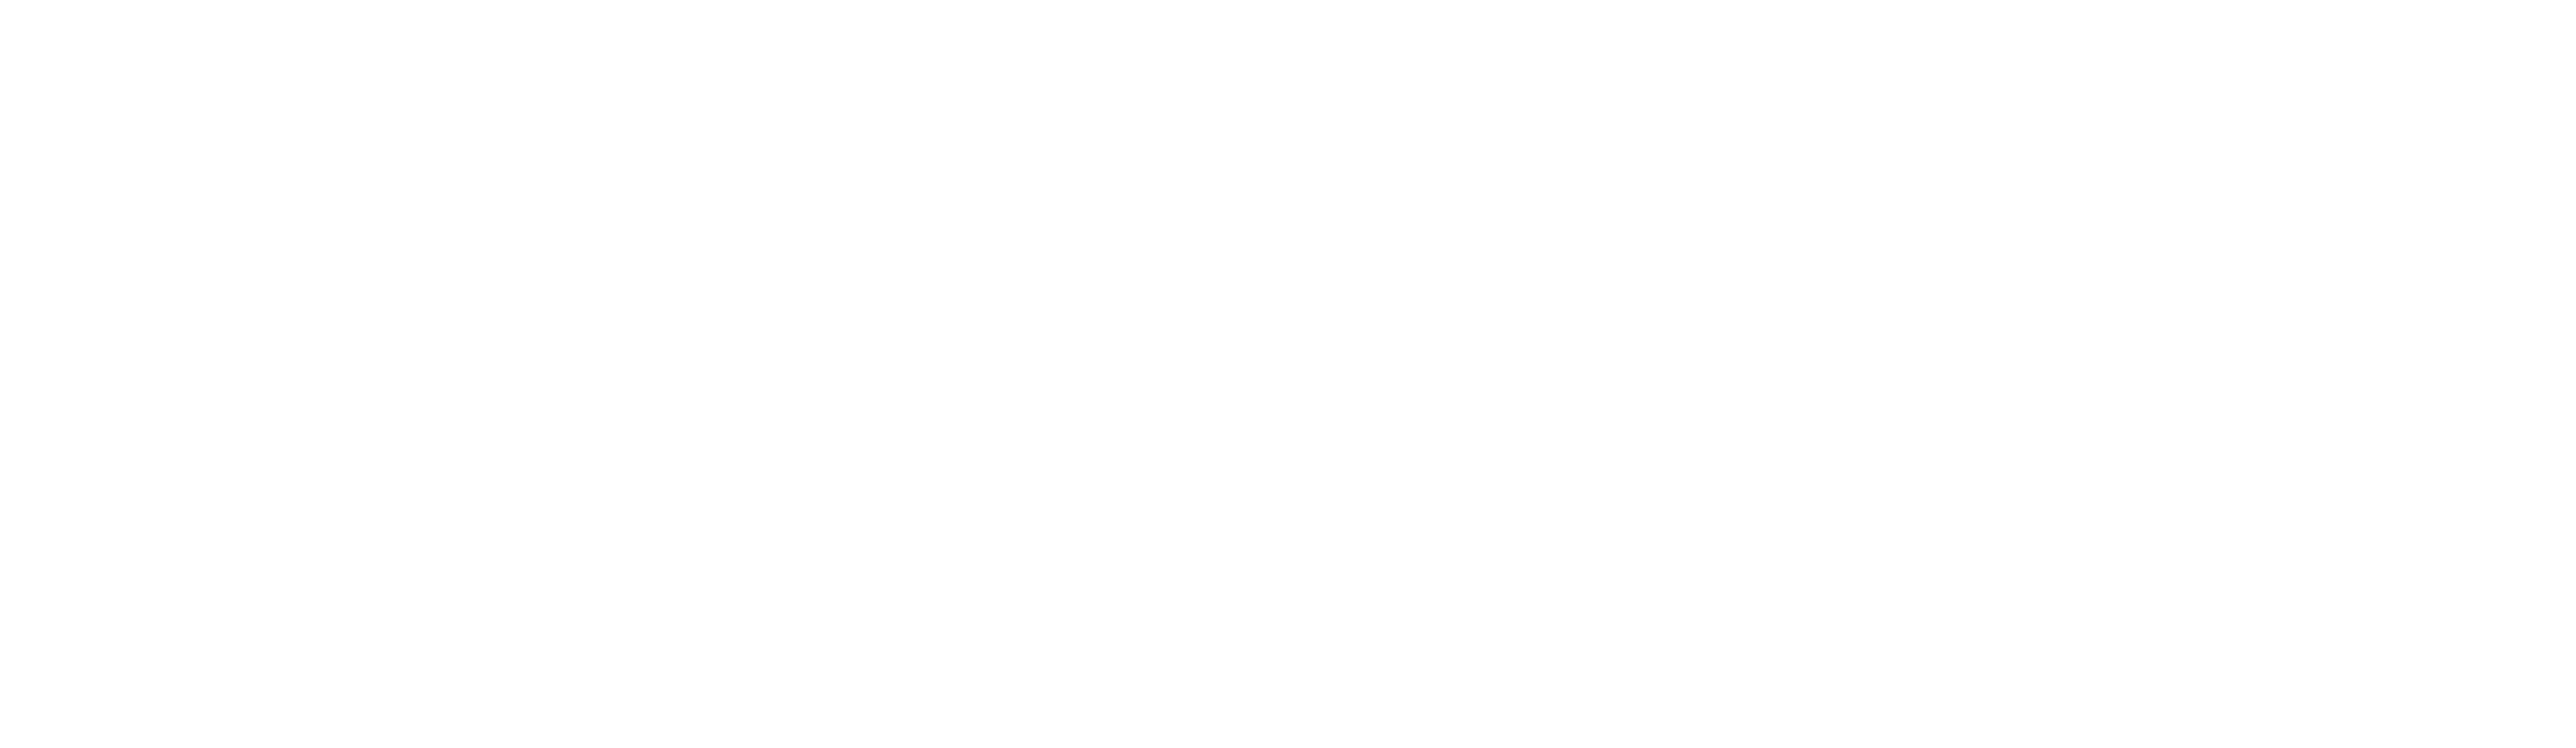 Ghosts of Writers Logo